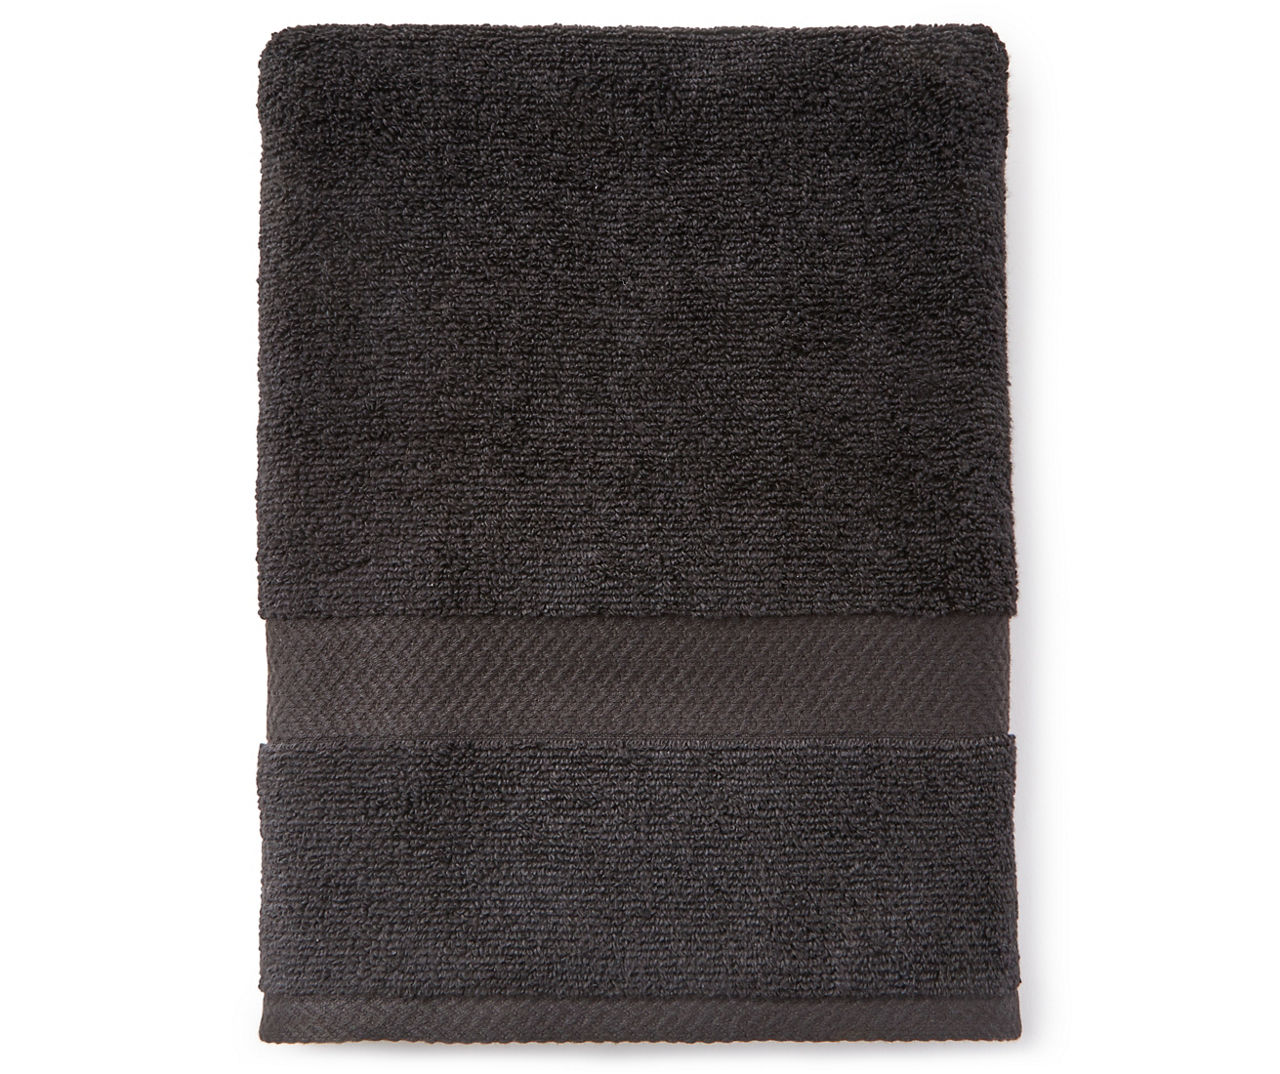 10,000+  Shoppers Just Bought These Large Bath Towels